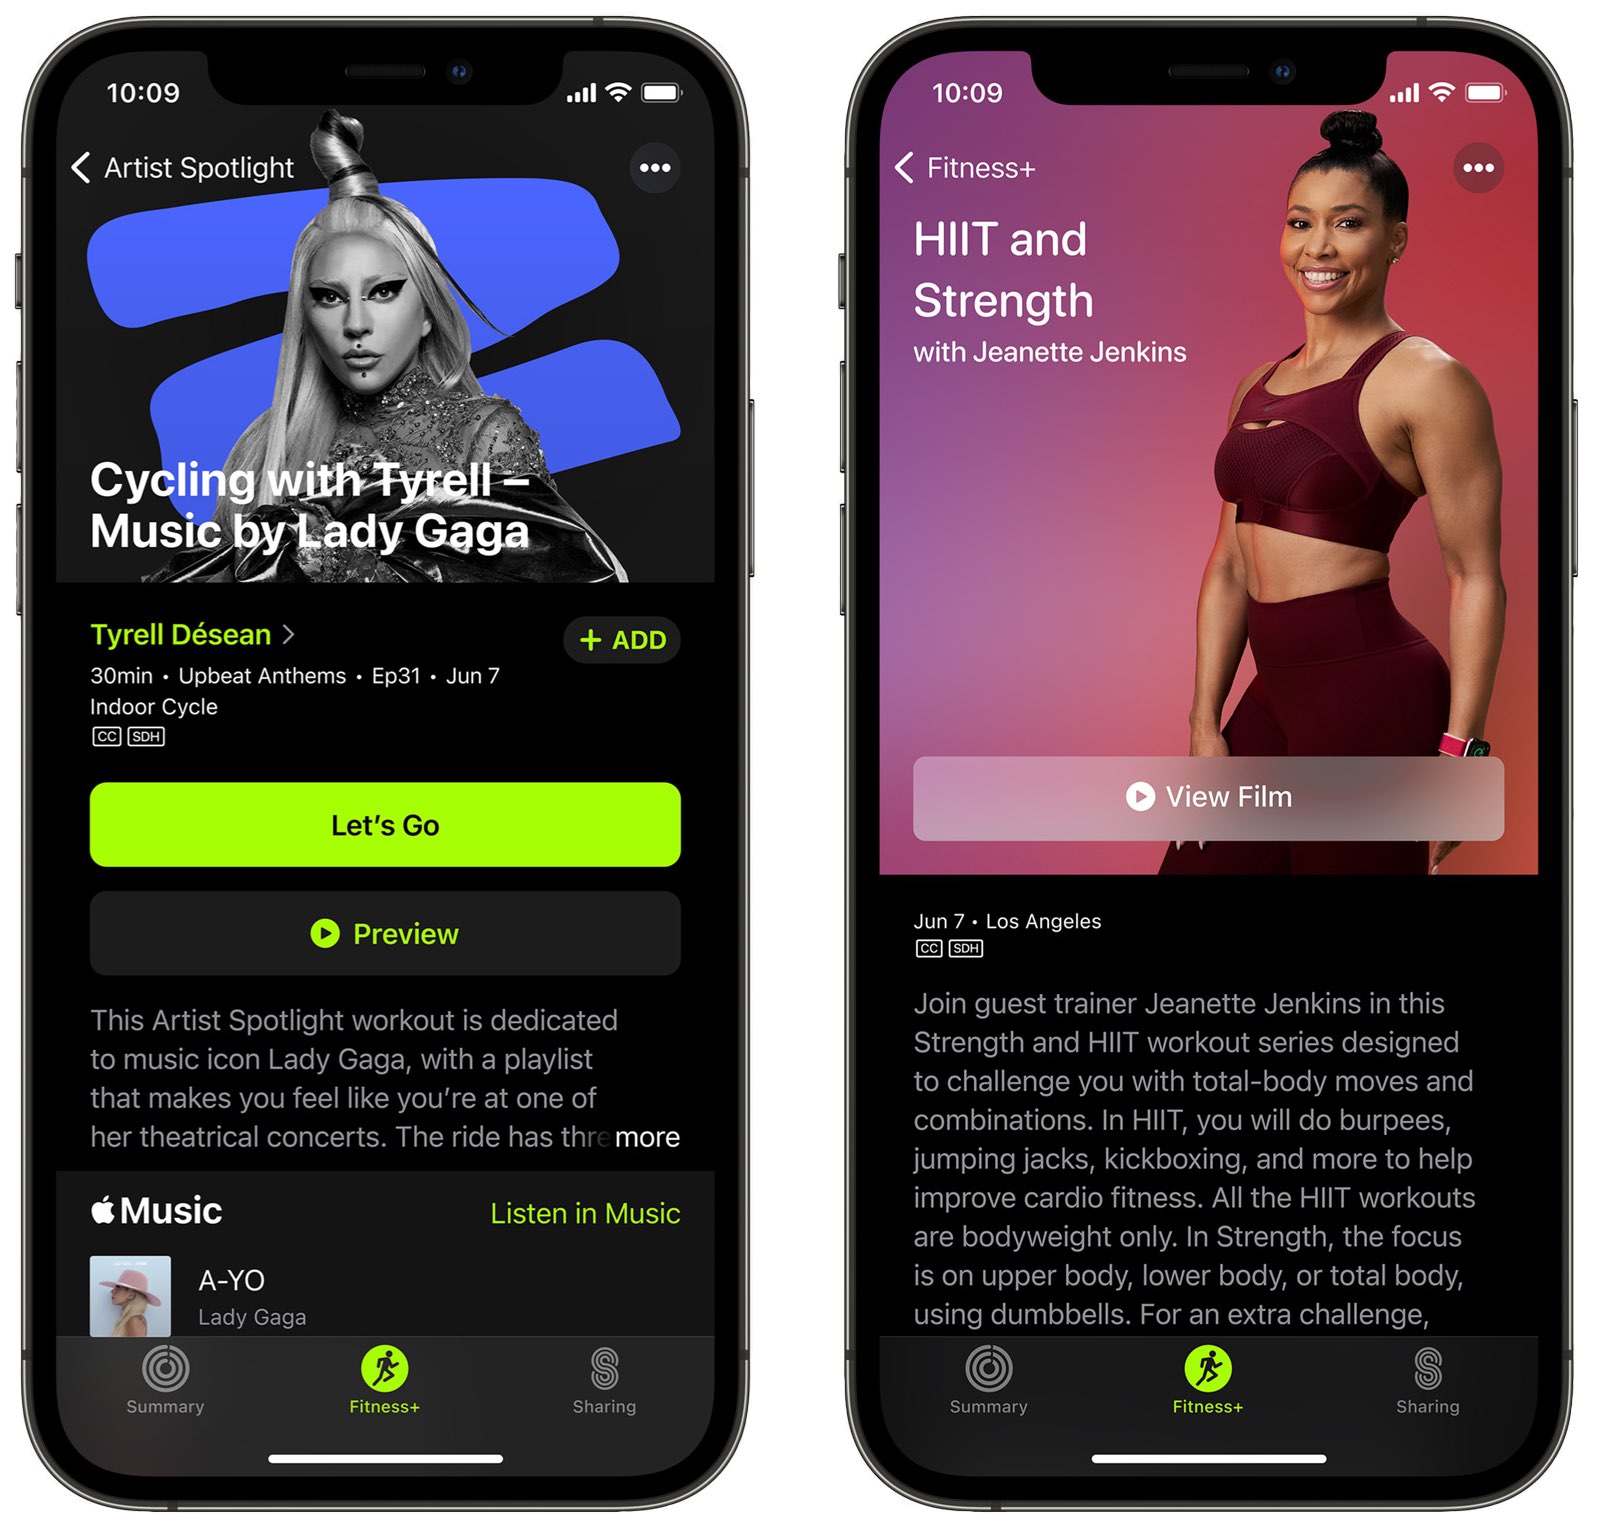 Promotional graphics showing the Artist Spotlight feature on Apple Fitness+ on iPhone